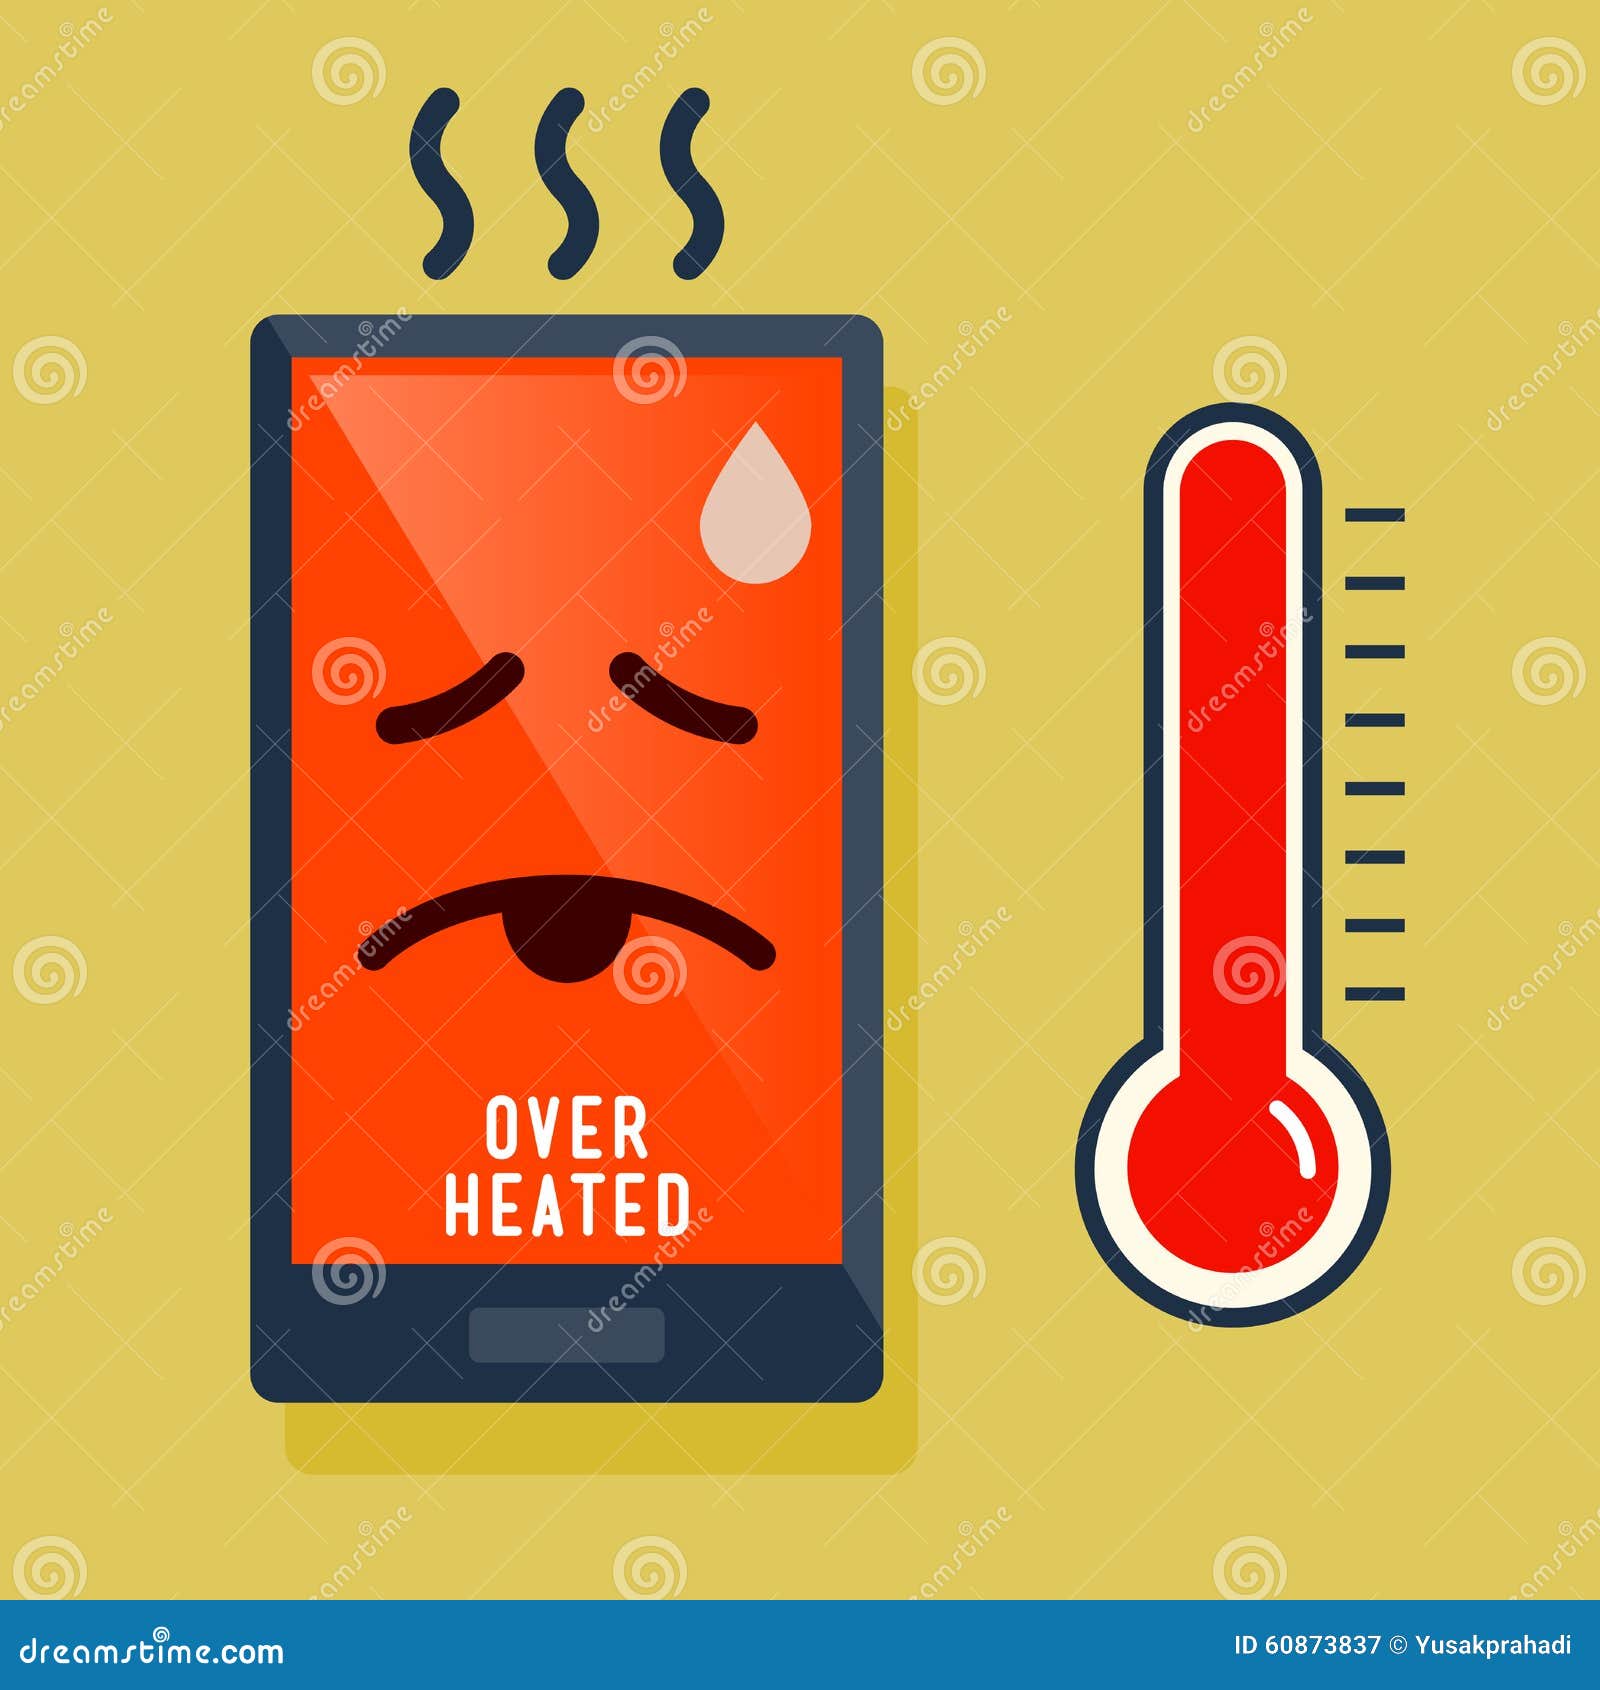 smart phone over heated icon